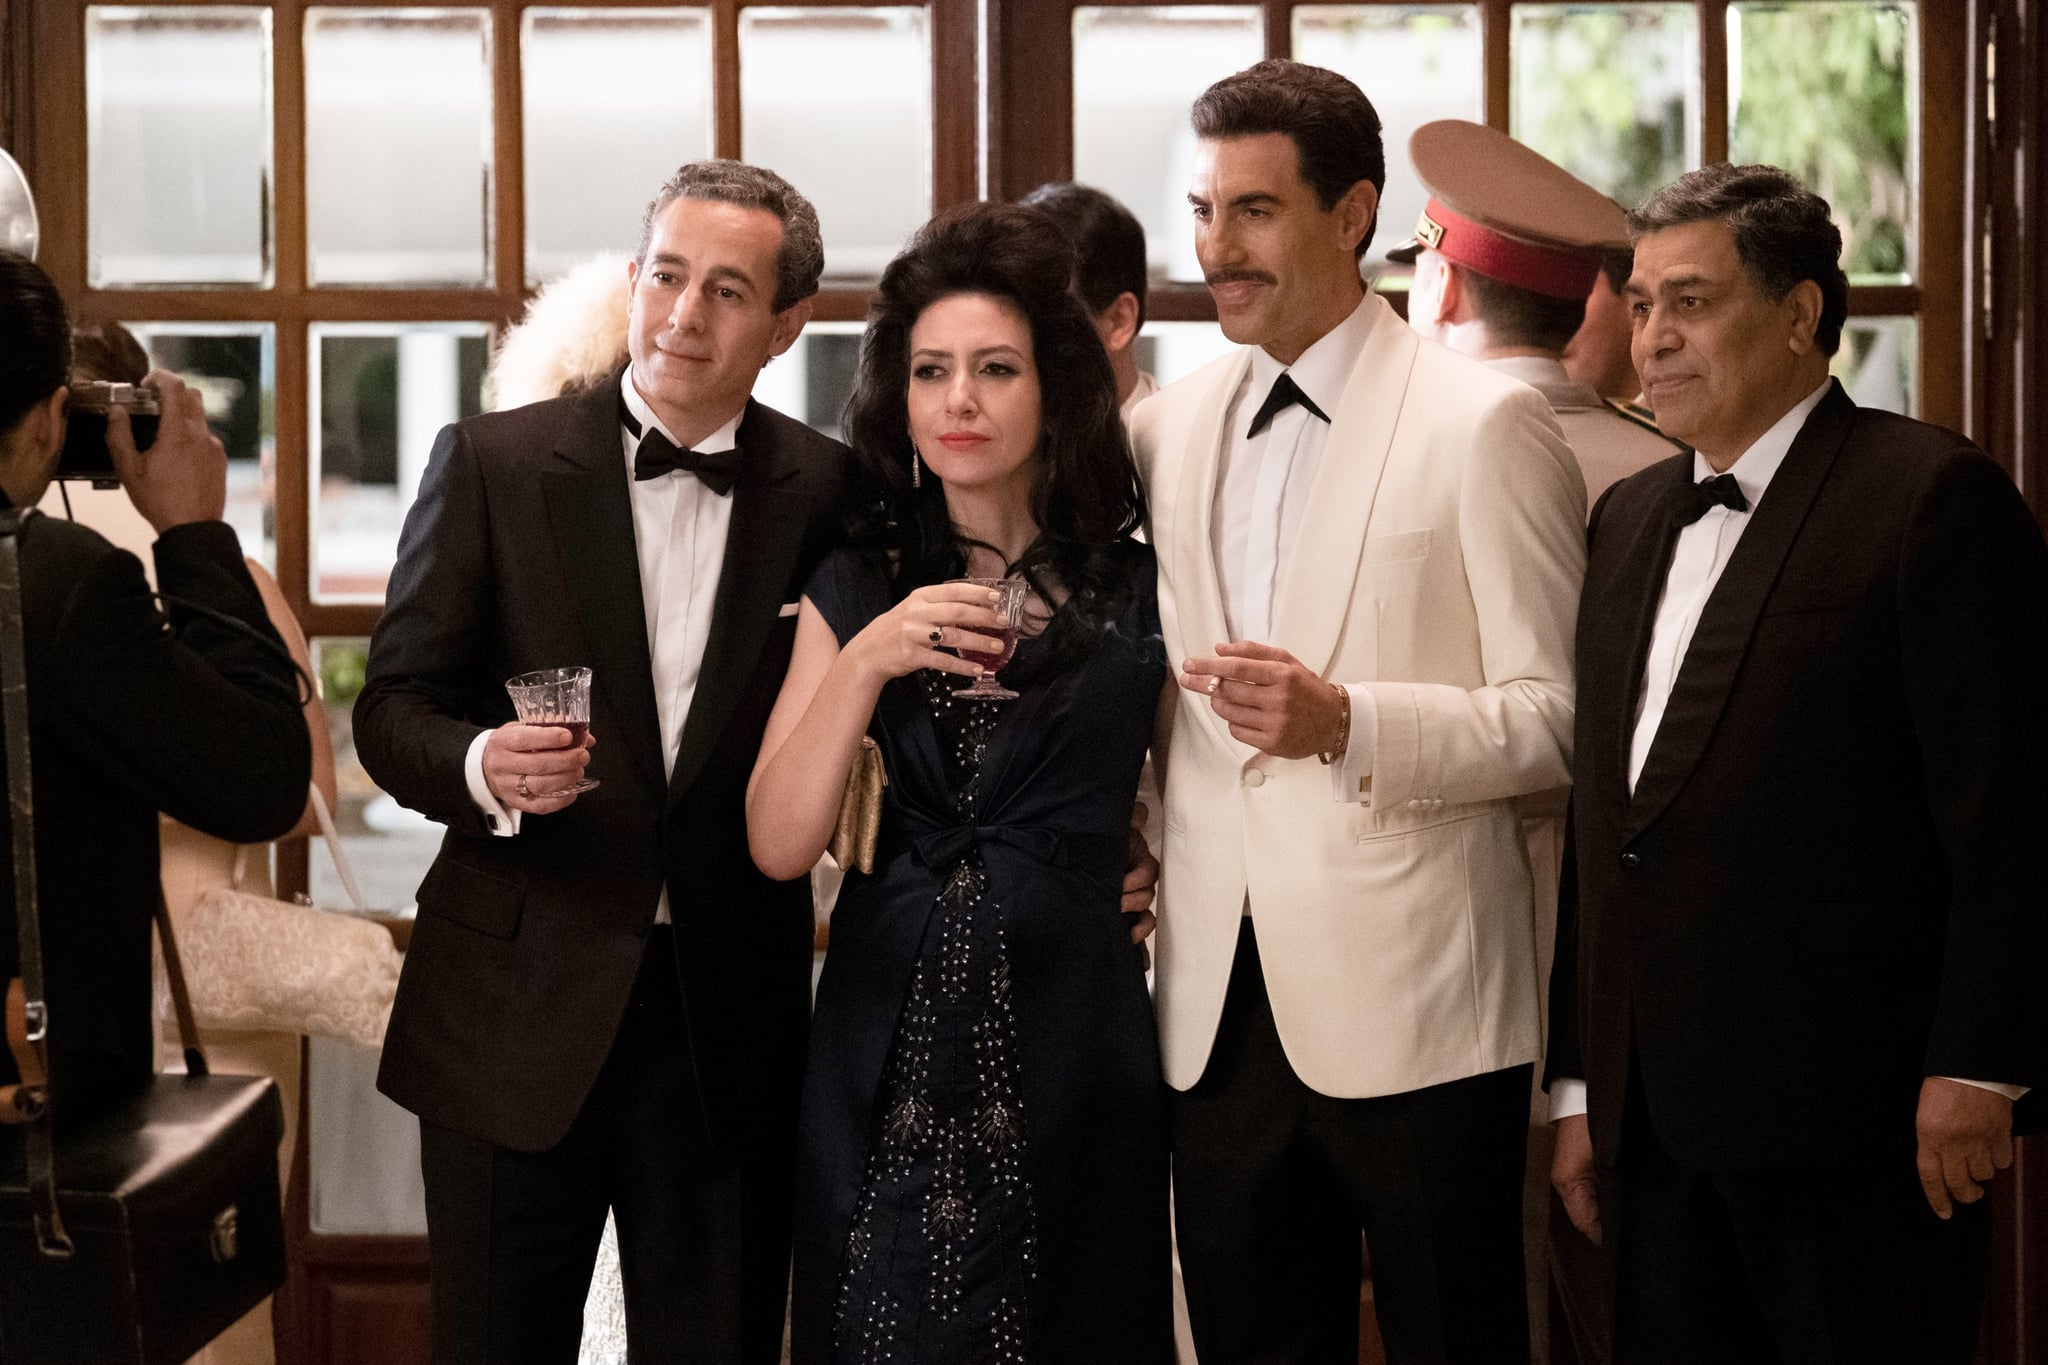 THE SPY, Waleed Zuaiter (left), Hadar Ratzon Rotem (2nd from left), Sacha Baron Cohen (2nd from right),  (Season 1, airs Sept. 6, 2019). photo: Axel Decis / Netflix / courtesy Everett Collection